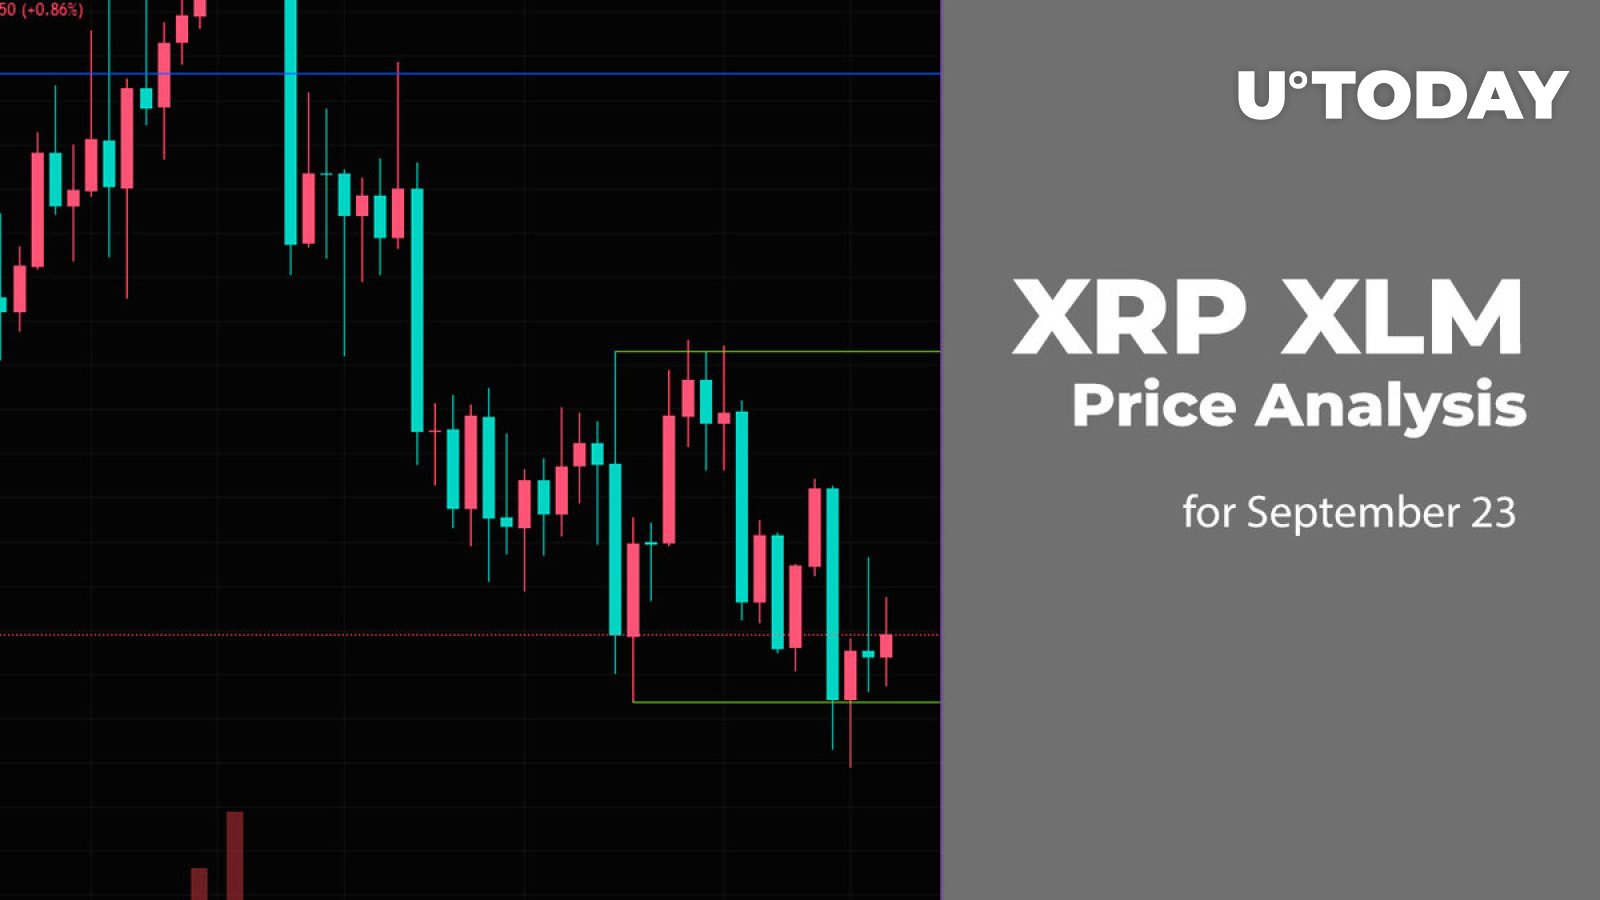 XRP and XLM Price Analysis for September 23